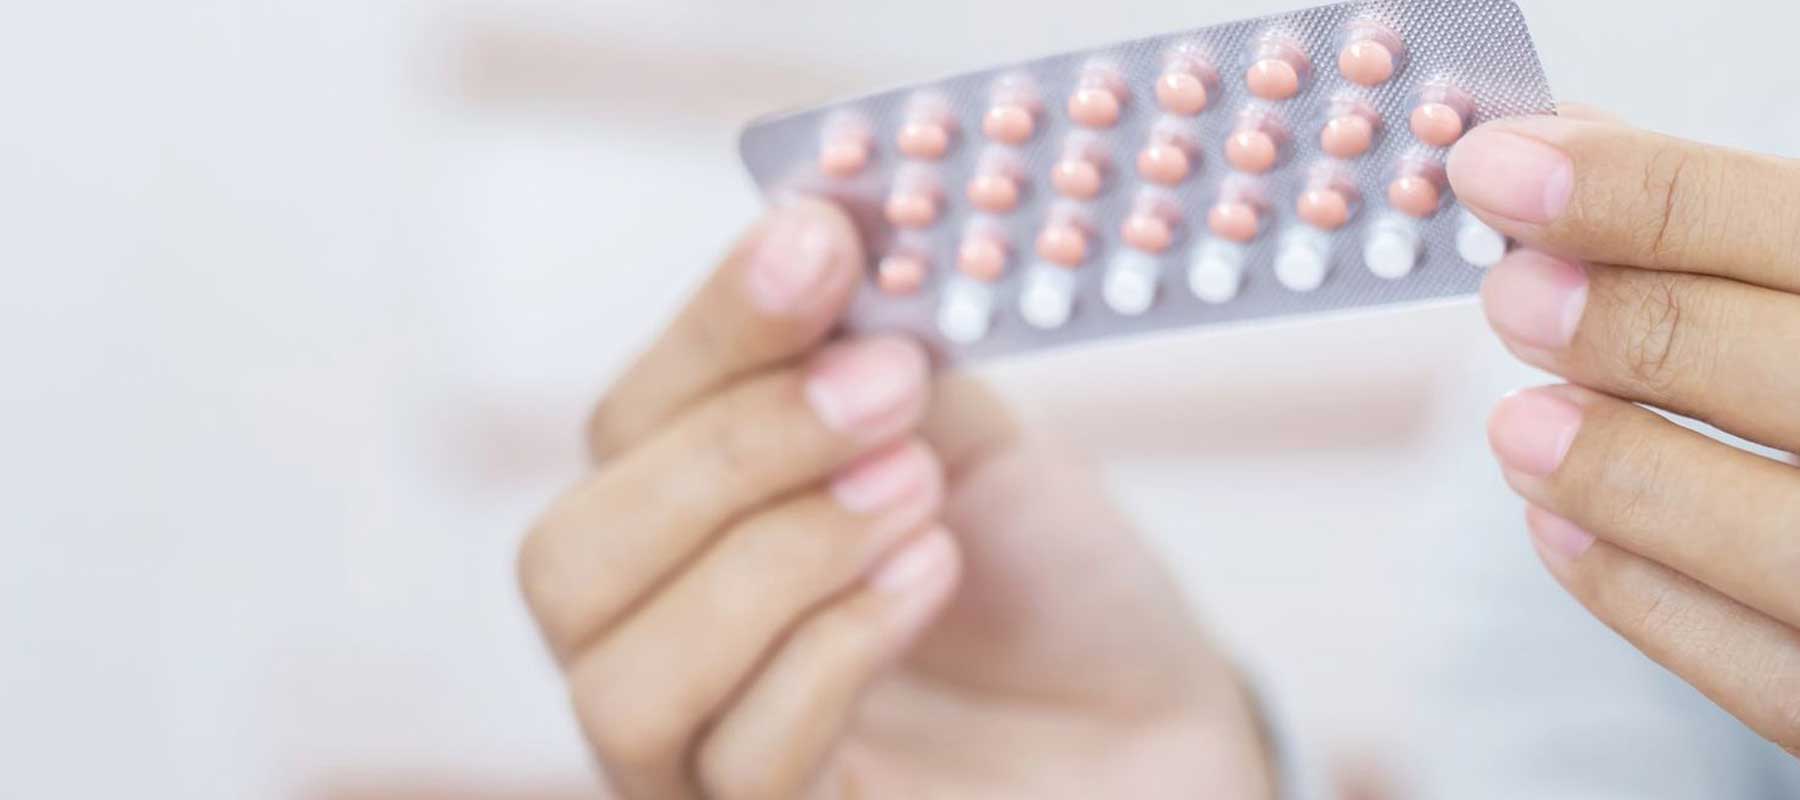 Curiosity 101: The Roots of Modern Birth Control